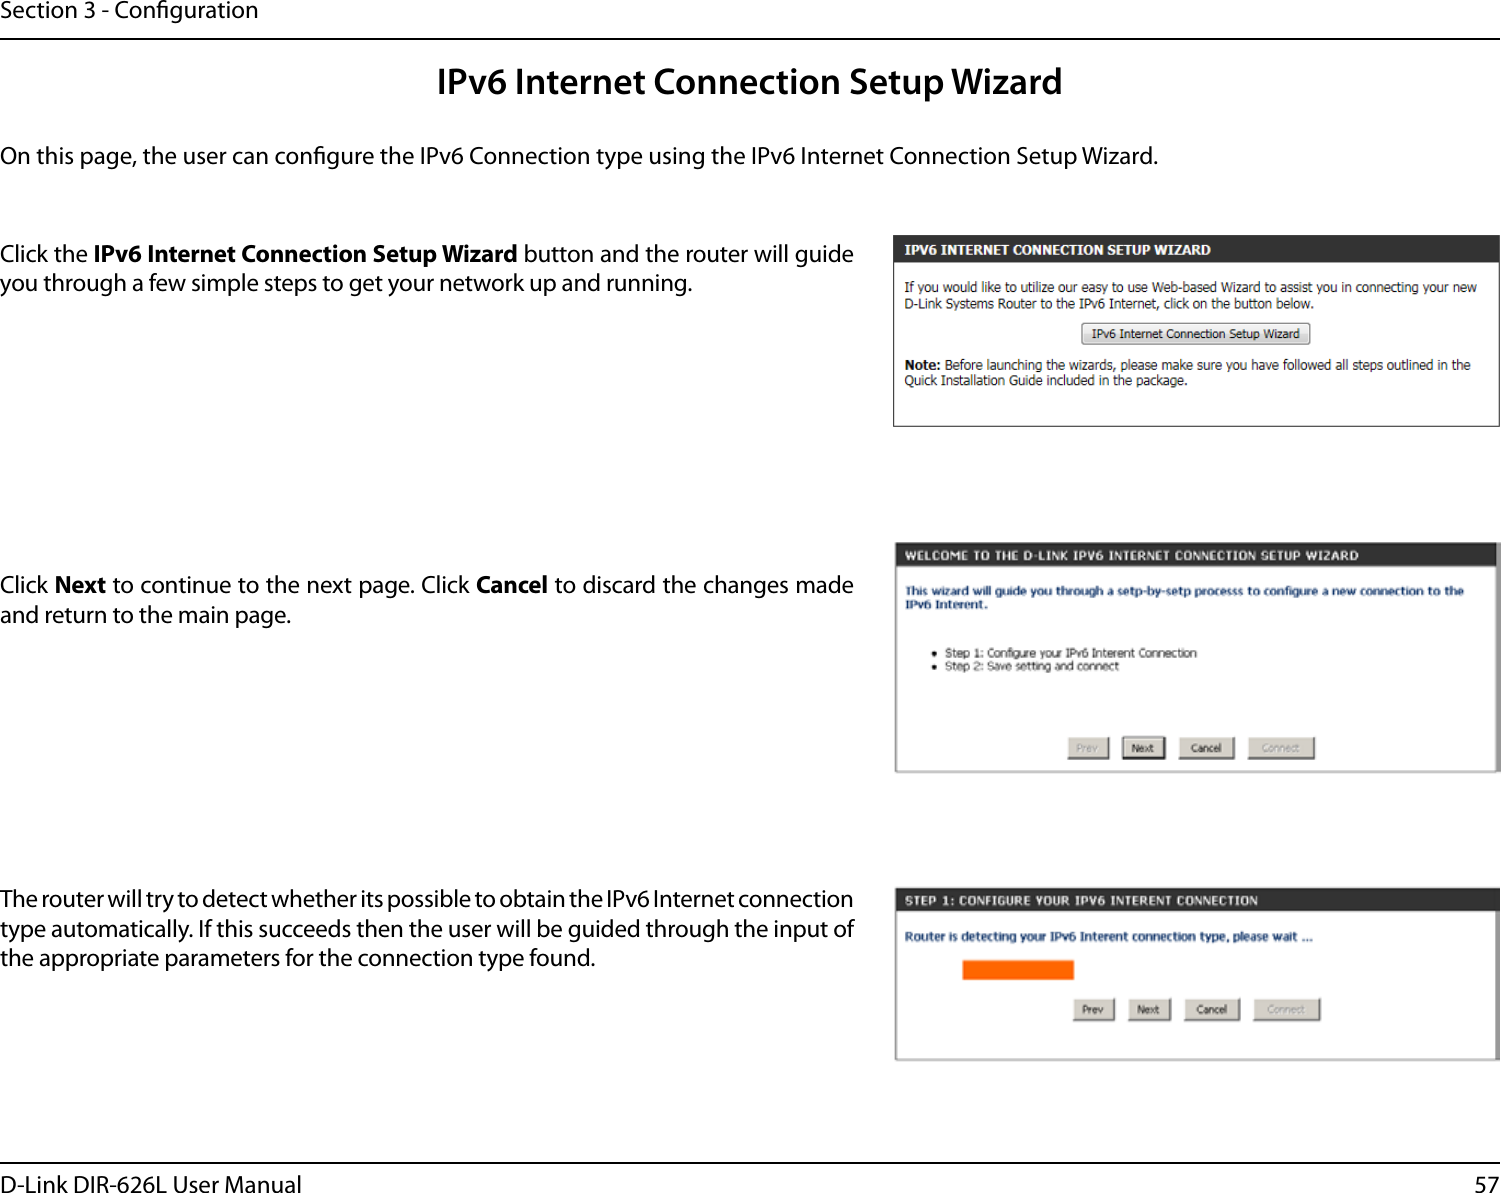 57D-Link DIR-626L User ManualSection 3 - CongurationIPv6 Internet Connection Setup WizardOn this page, the user can congure the IPv6 Connection type using the IPv6 Internet Connection Setup Wizard.Click the IPv6 Internet Connection Setup Wizard button and the router will guide you through a few simple steps to get your network up and running.Click Next to continue to the next page. Click Cancel to discard the changes made and return to the main page.The router will try to detect whether its possible to obtain the IPv6 Internet connection type automatically. If this succeeds then the user will be guided through the input of the appropriate parameters for the connection type found.